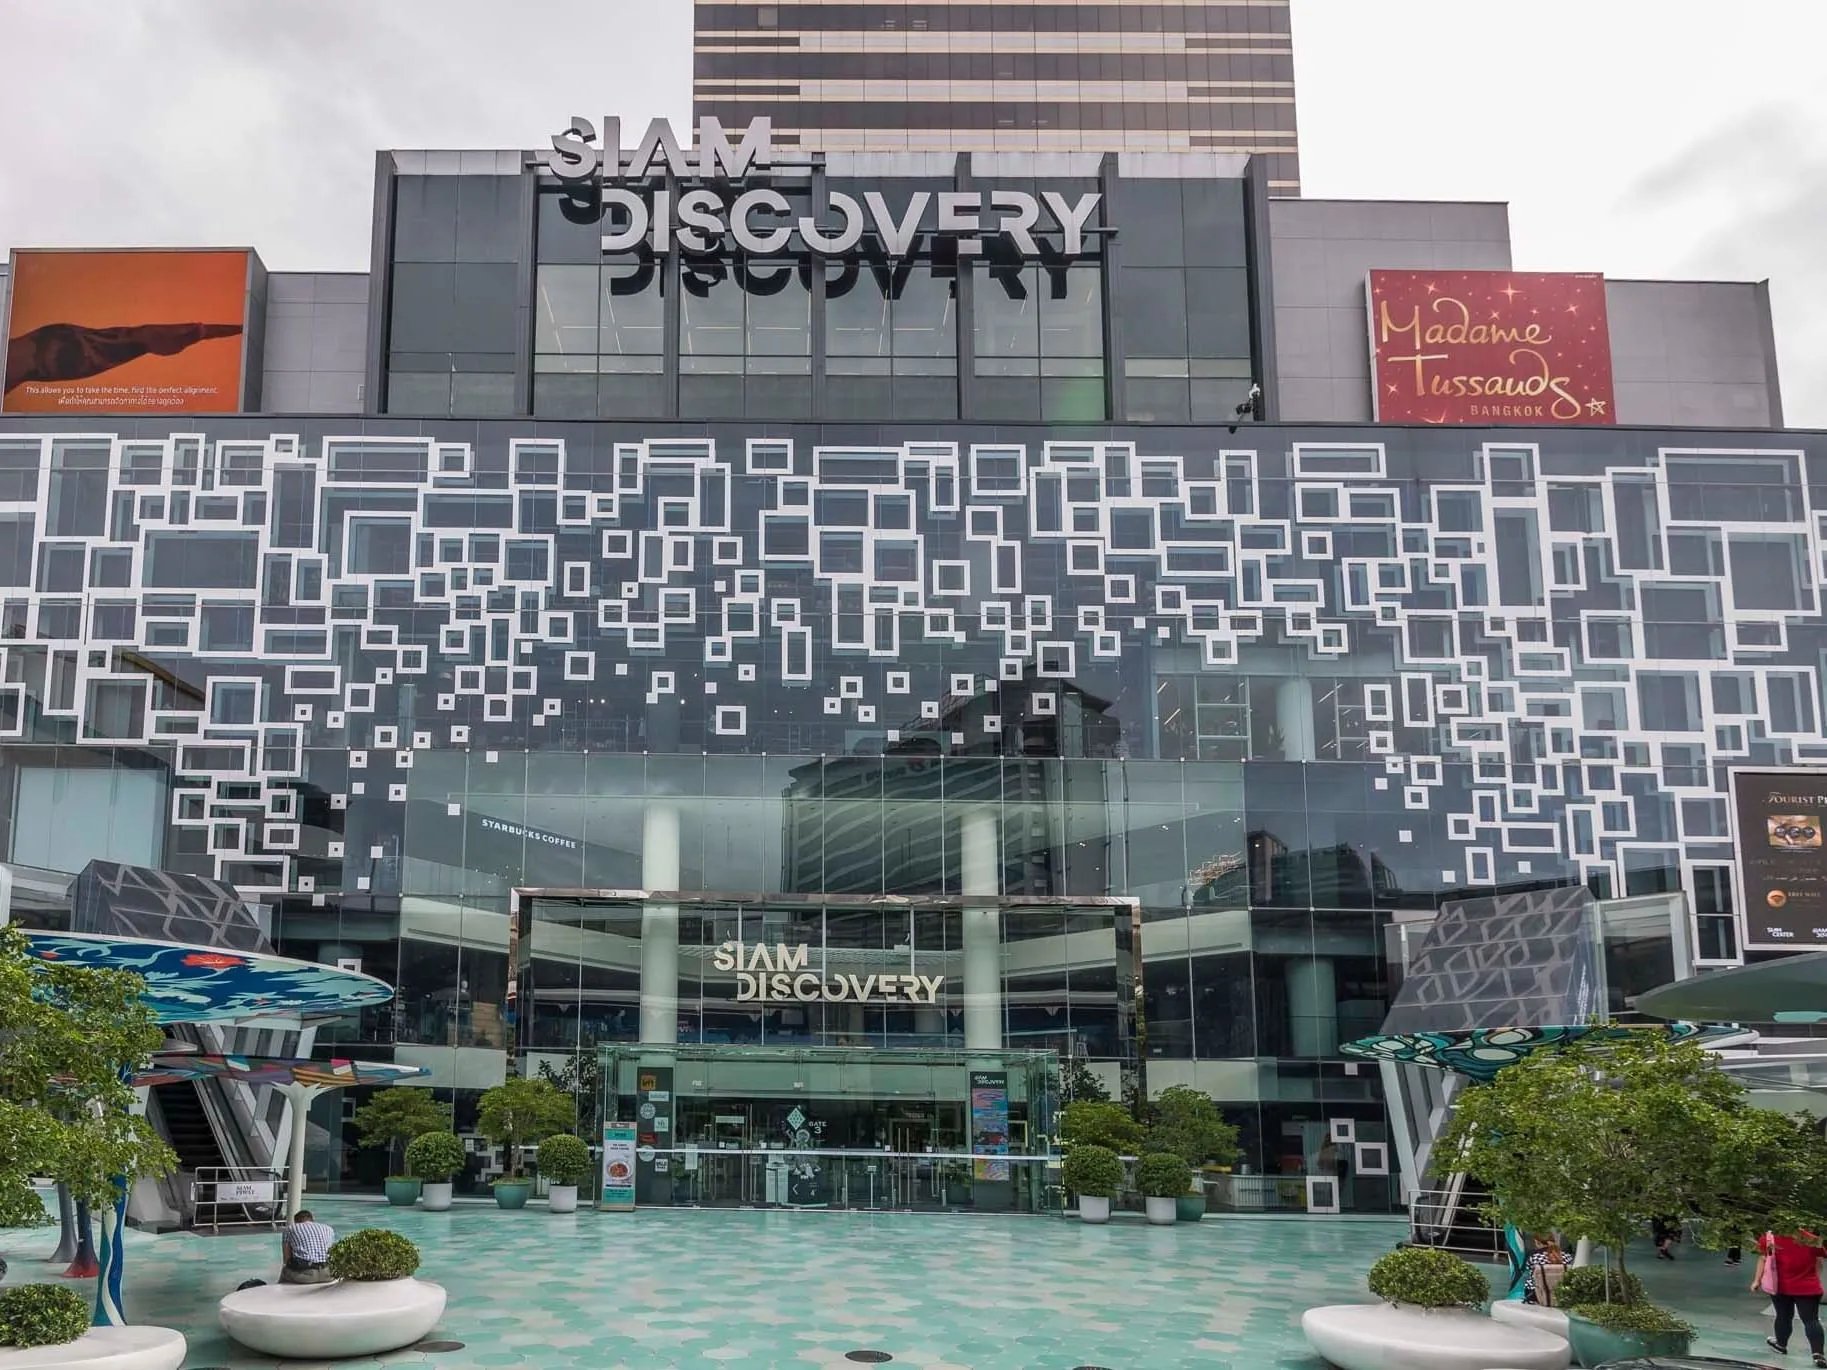 Siam Discovery in Thailand, central_asia | Fragrance,Handbags,Shoes,Accessories,Clothes,Cosmetics - Country Helper